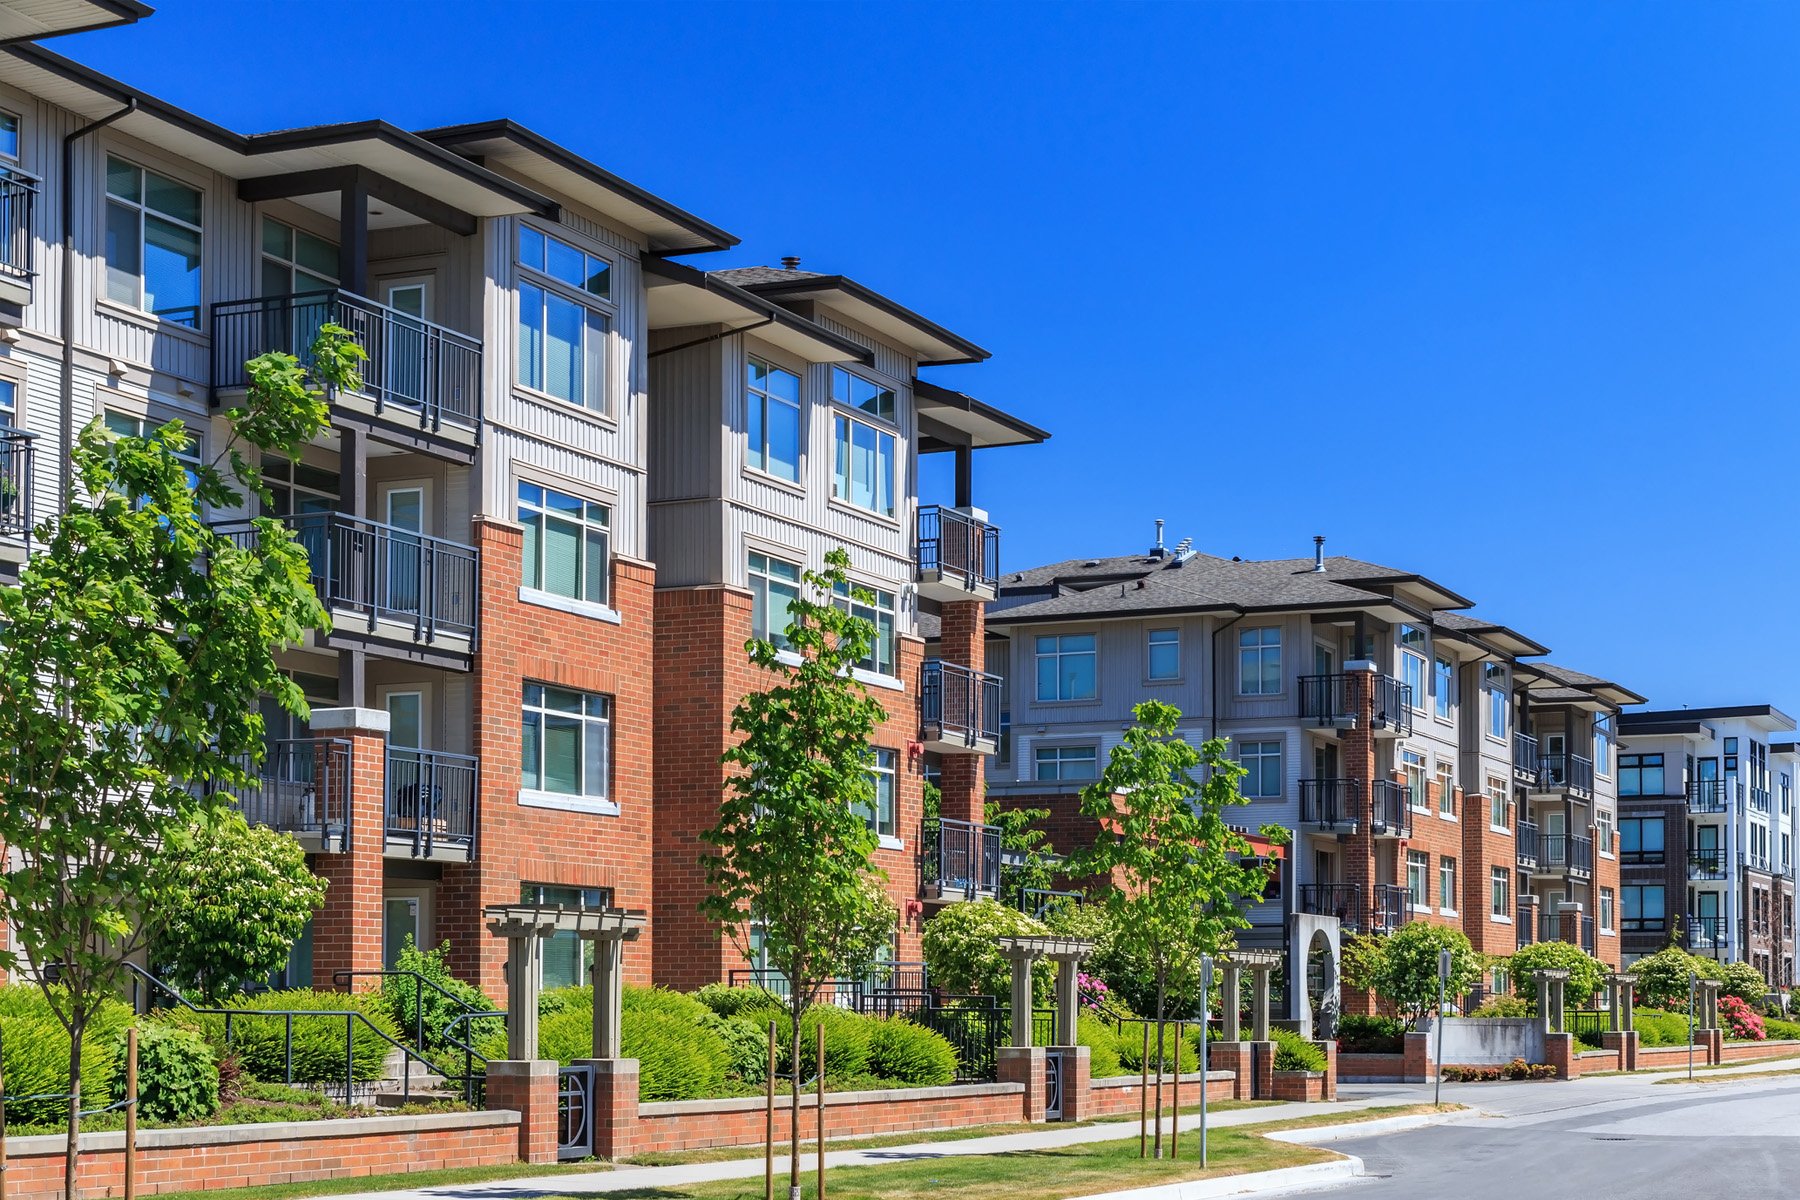 New Rules For Condo Mortgages By Freddie Mac | Defects In Condo Buildings May Hold Up Sales Or Reduce Prices